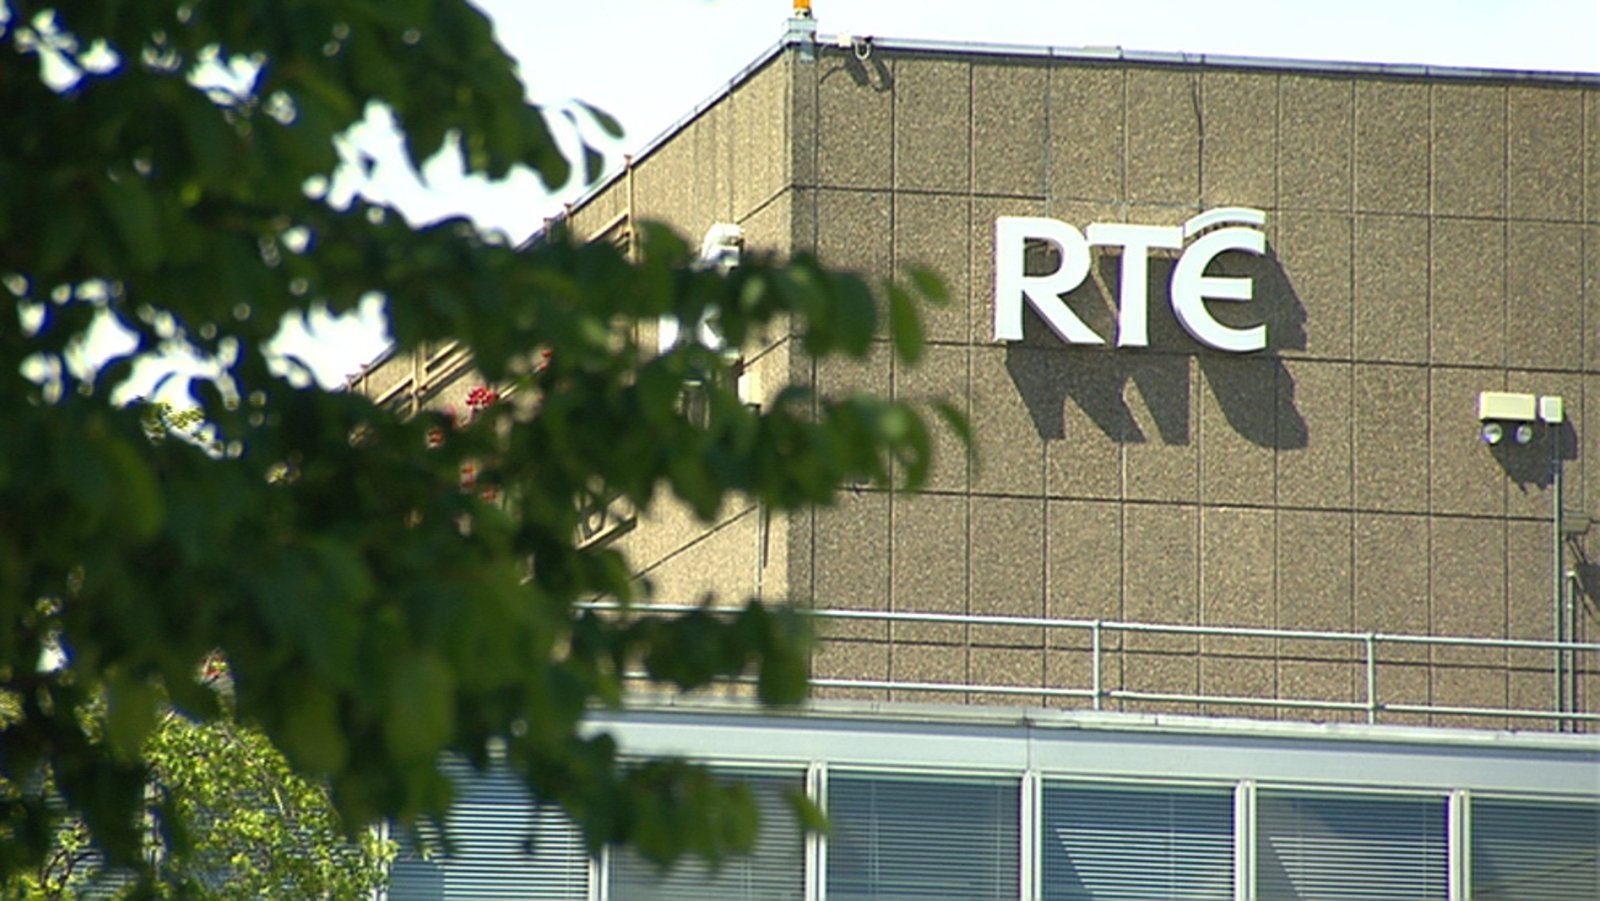 More Mystery Payments from RTE 'Barter Account' Uncovered